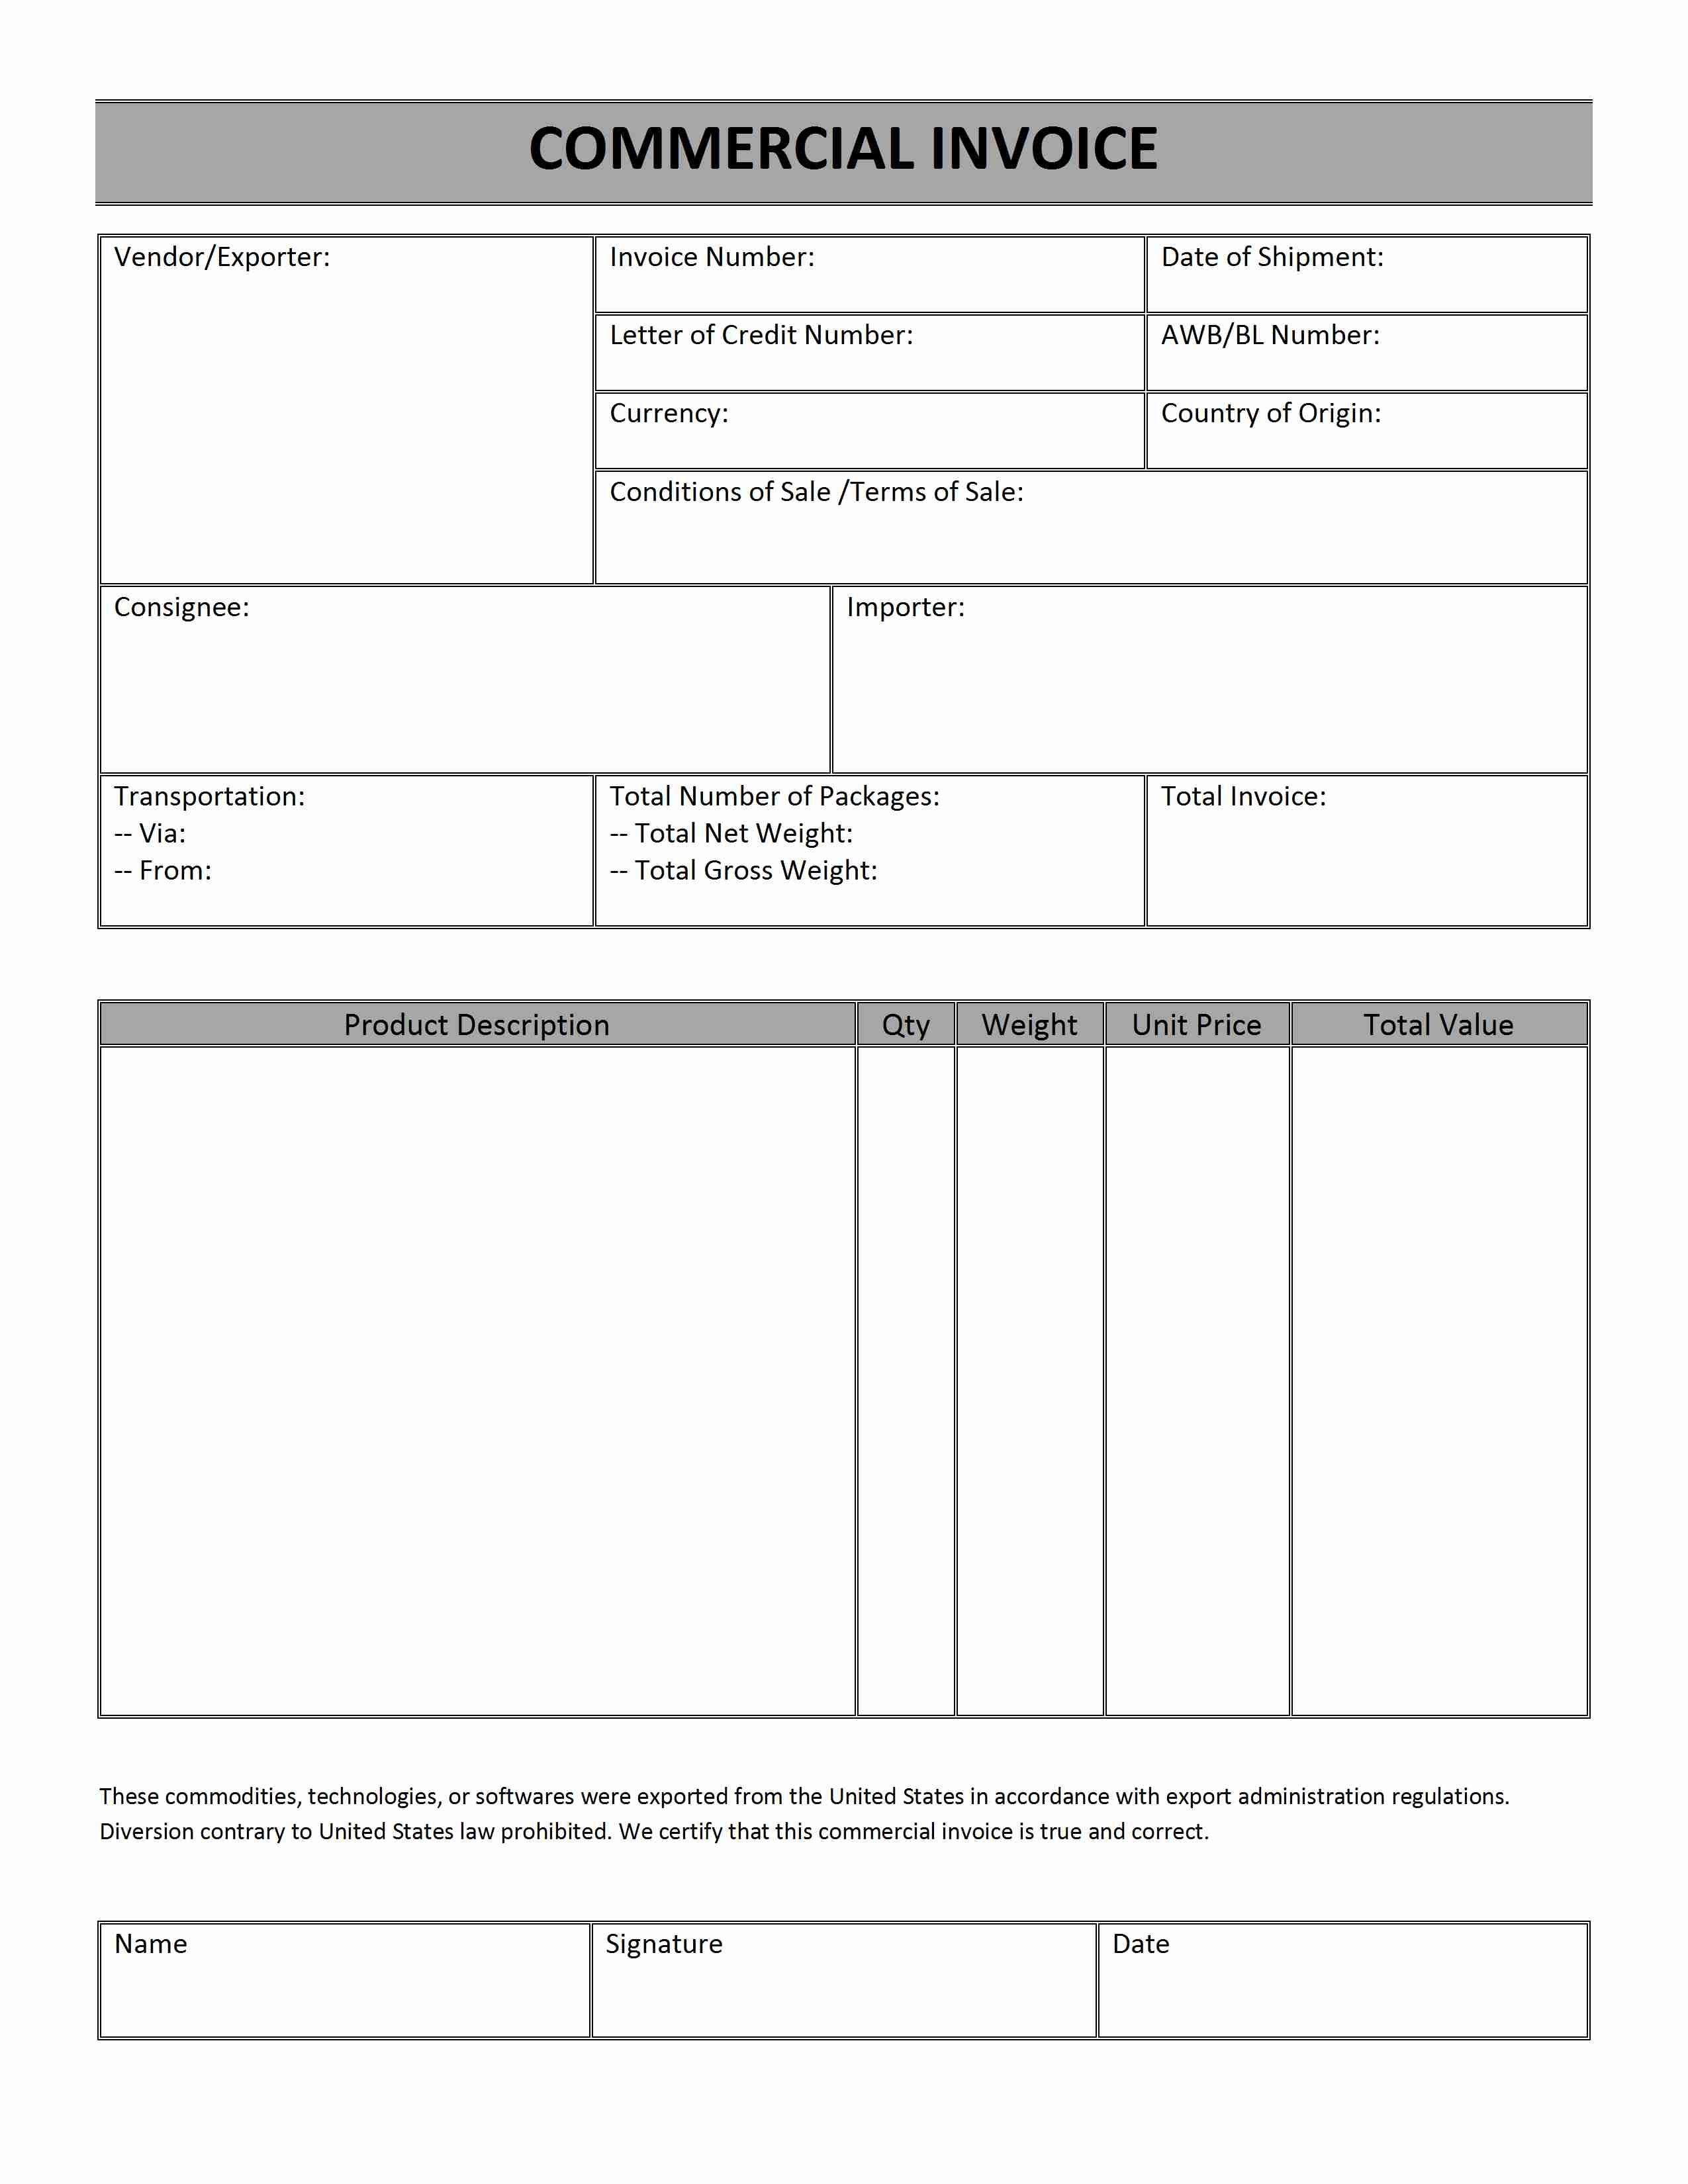 commercial invoice word templates free word templates ms commercial invoice form customs